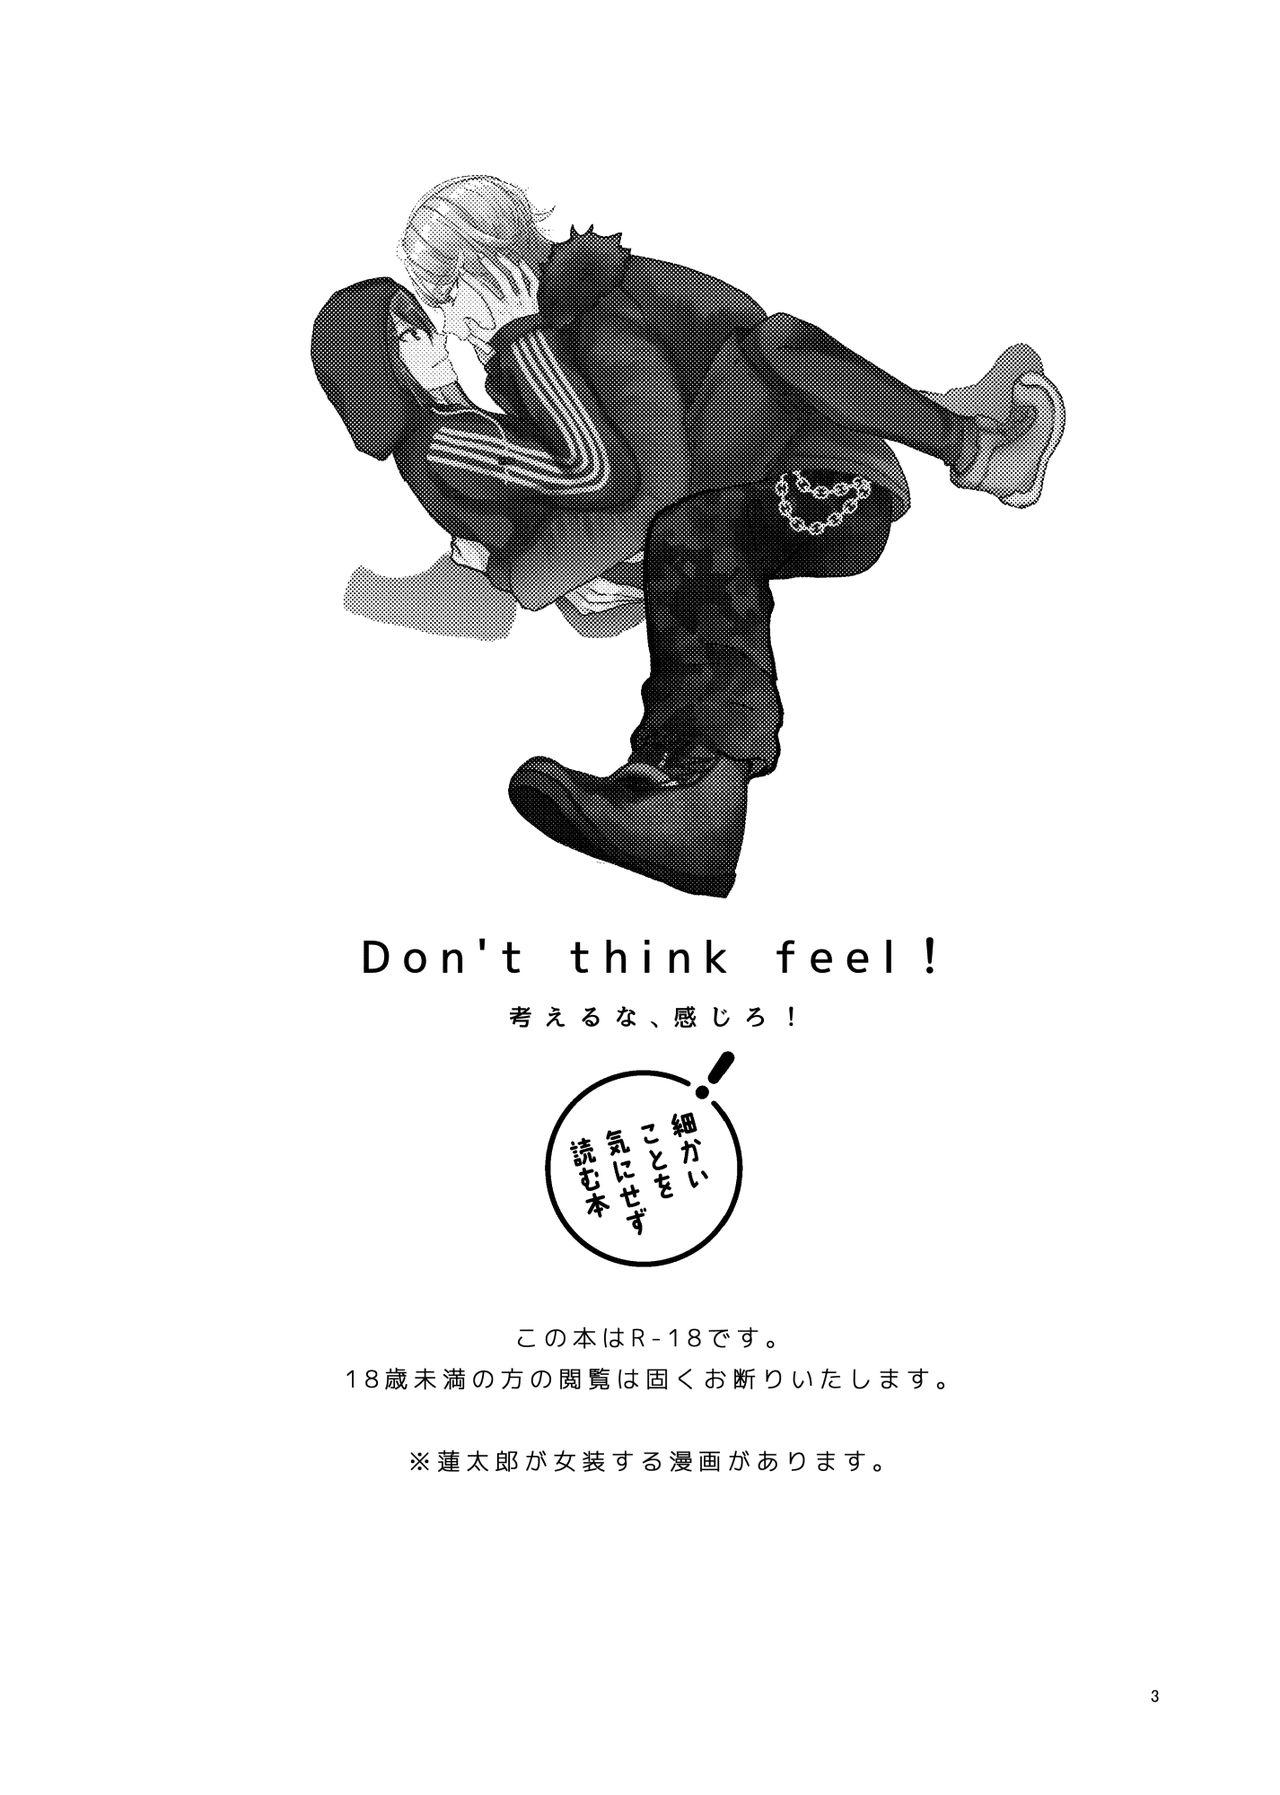 Don't think feel! 2